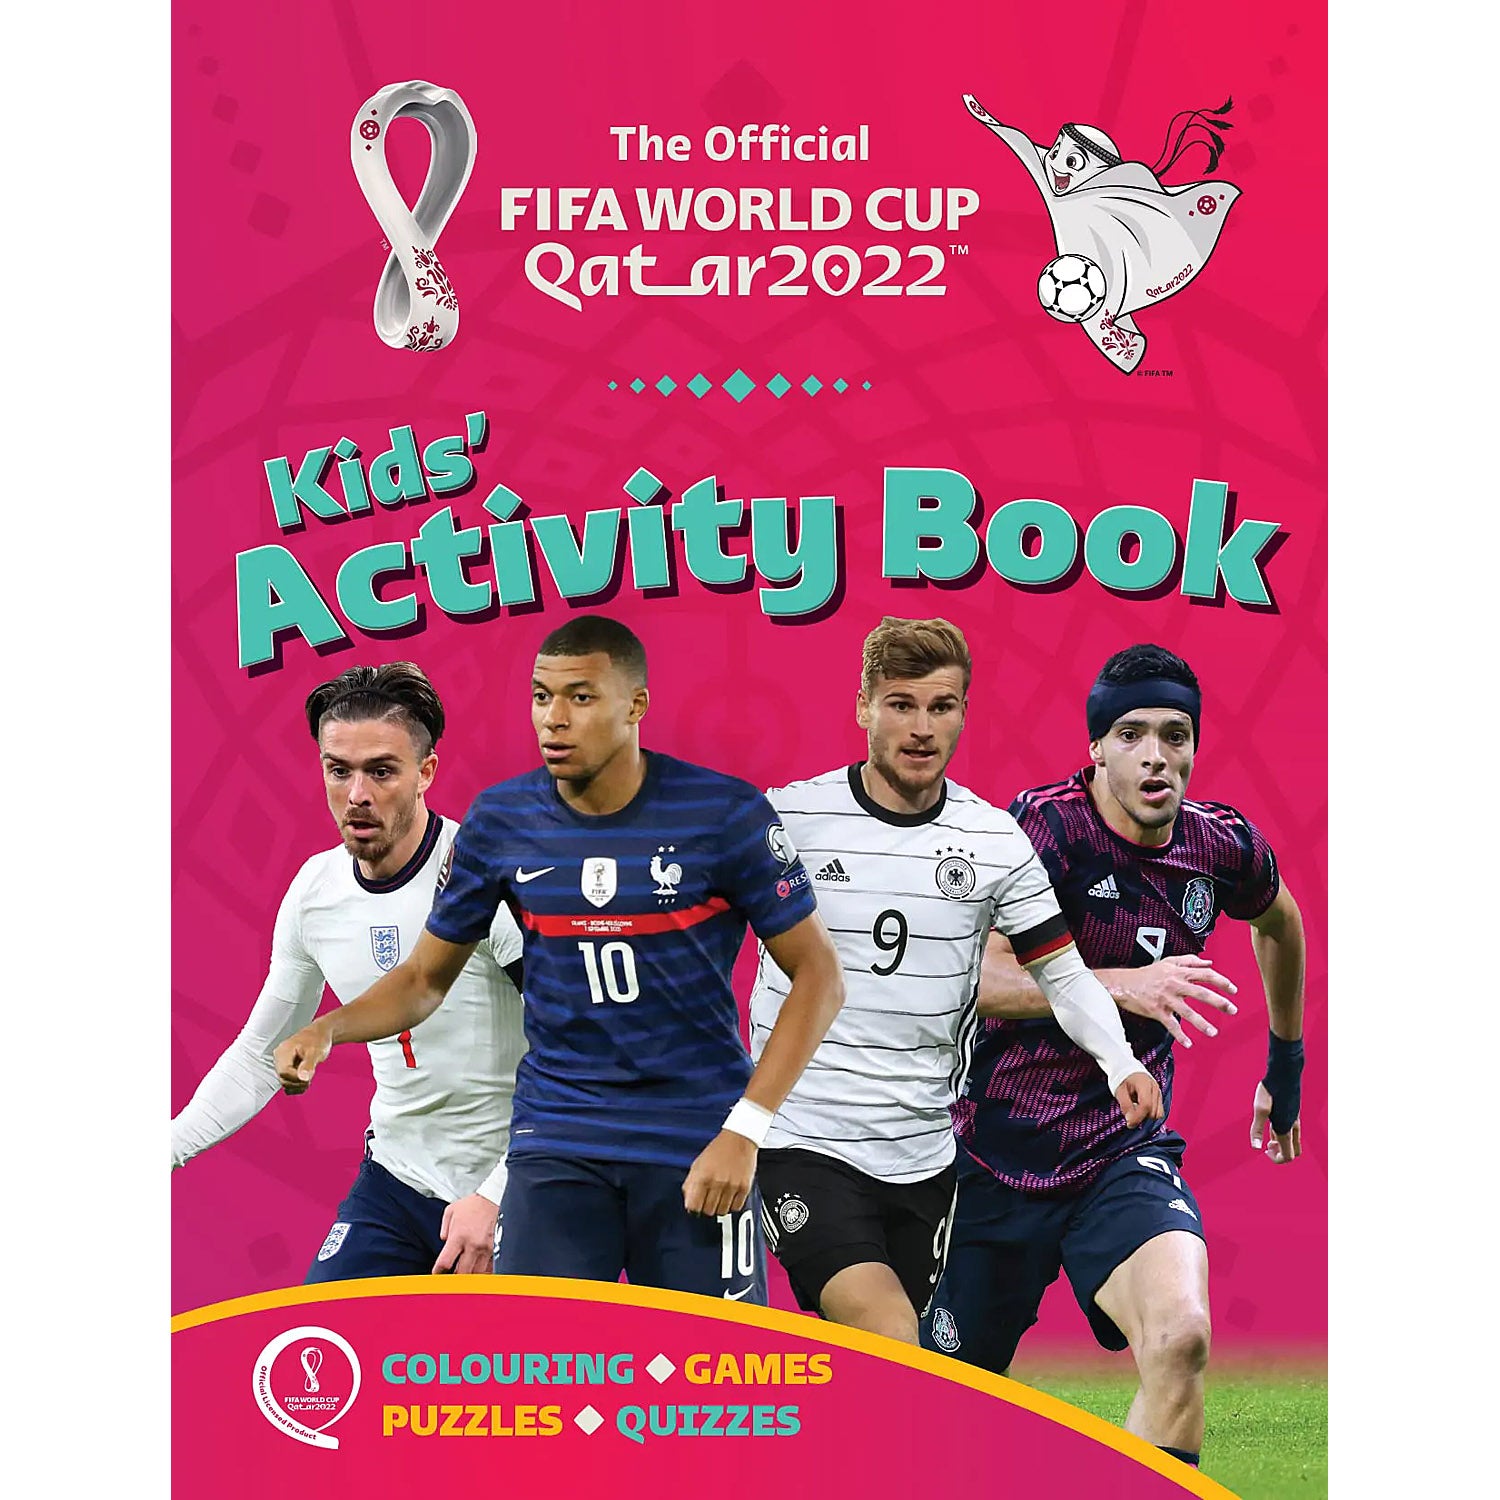 The Official FIFA World Cup Qatar 2022 Kids' Activity Book